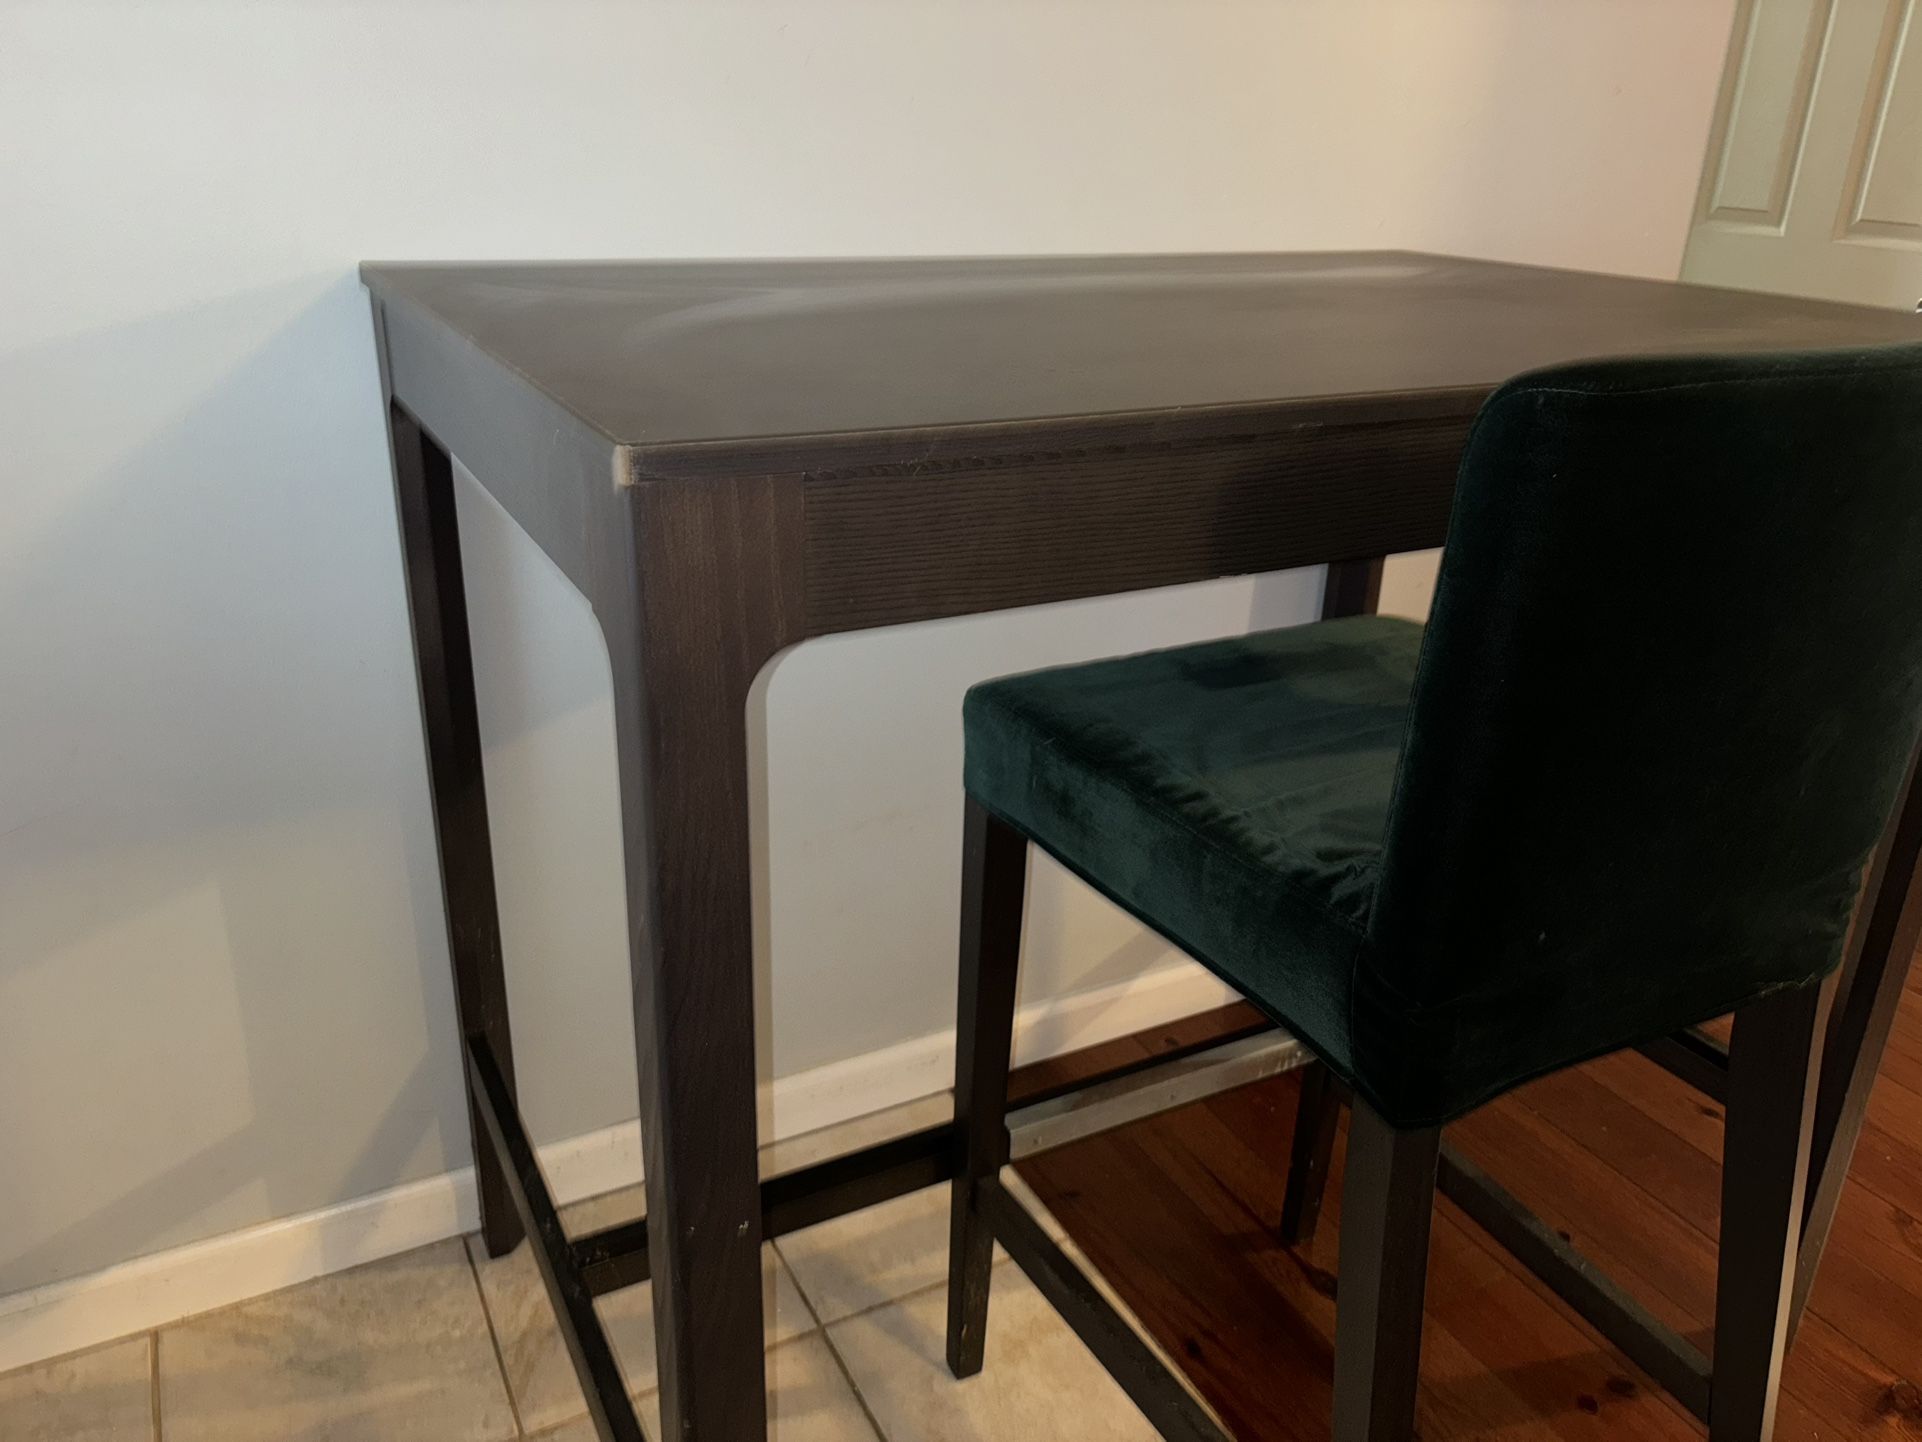 IKEA Table and chair